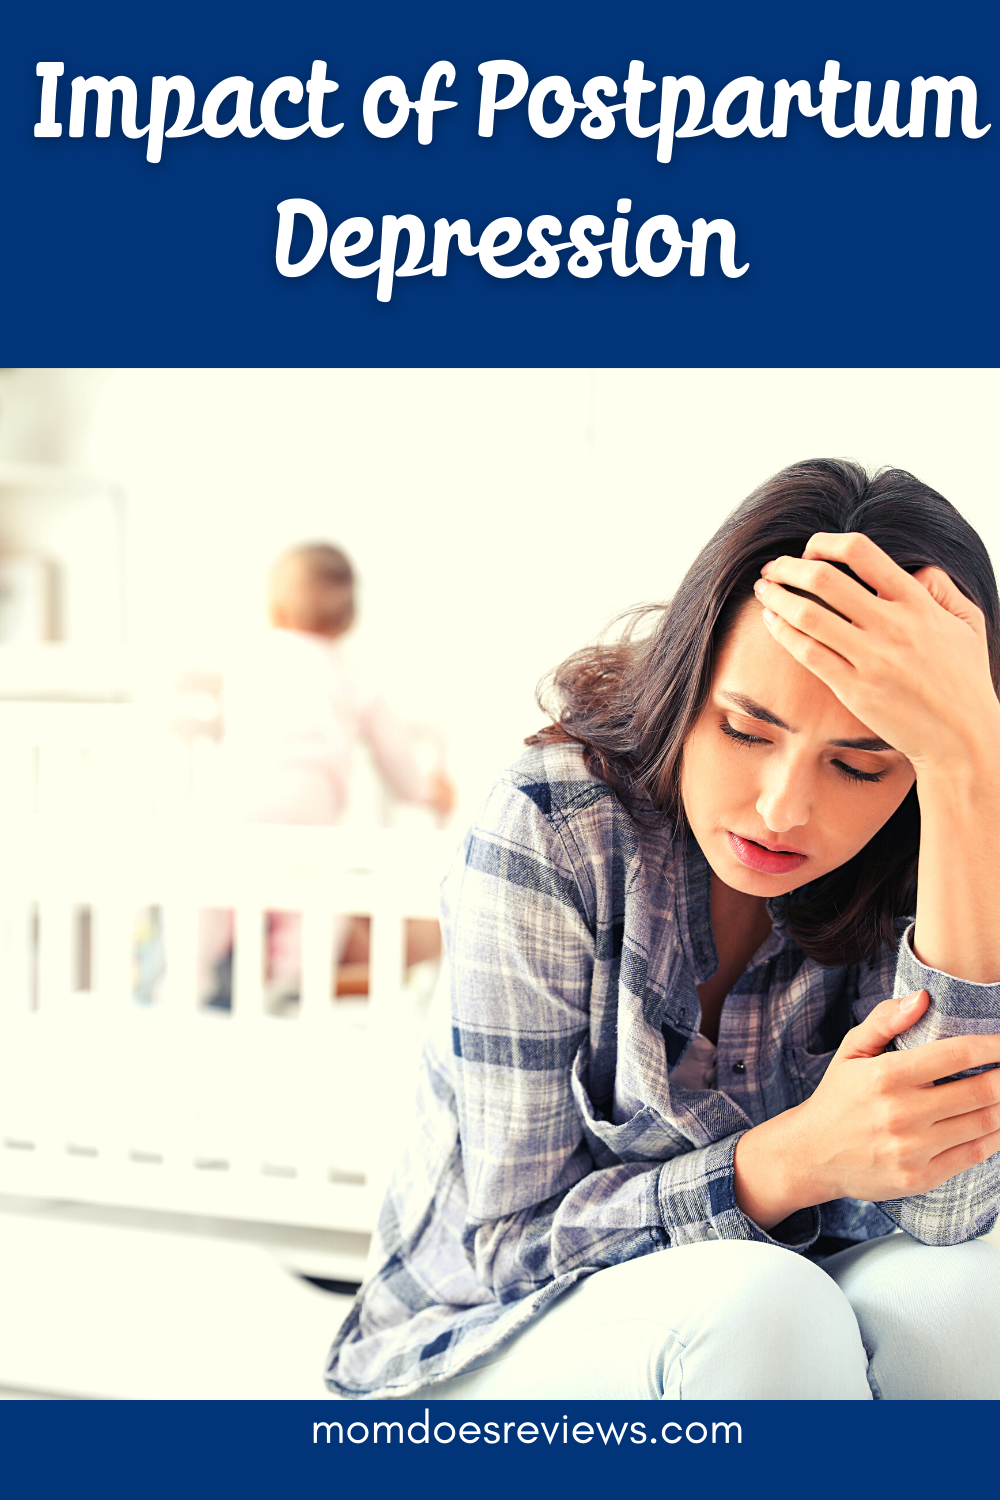 What Are The Long-Term Impacts Of Postpartum Depression?